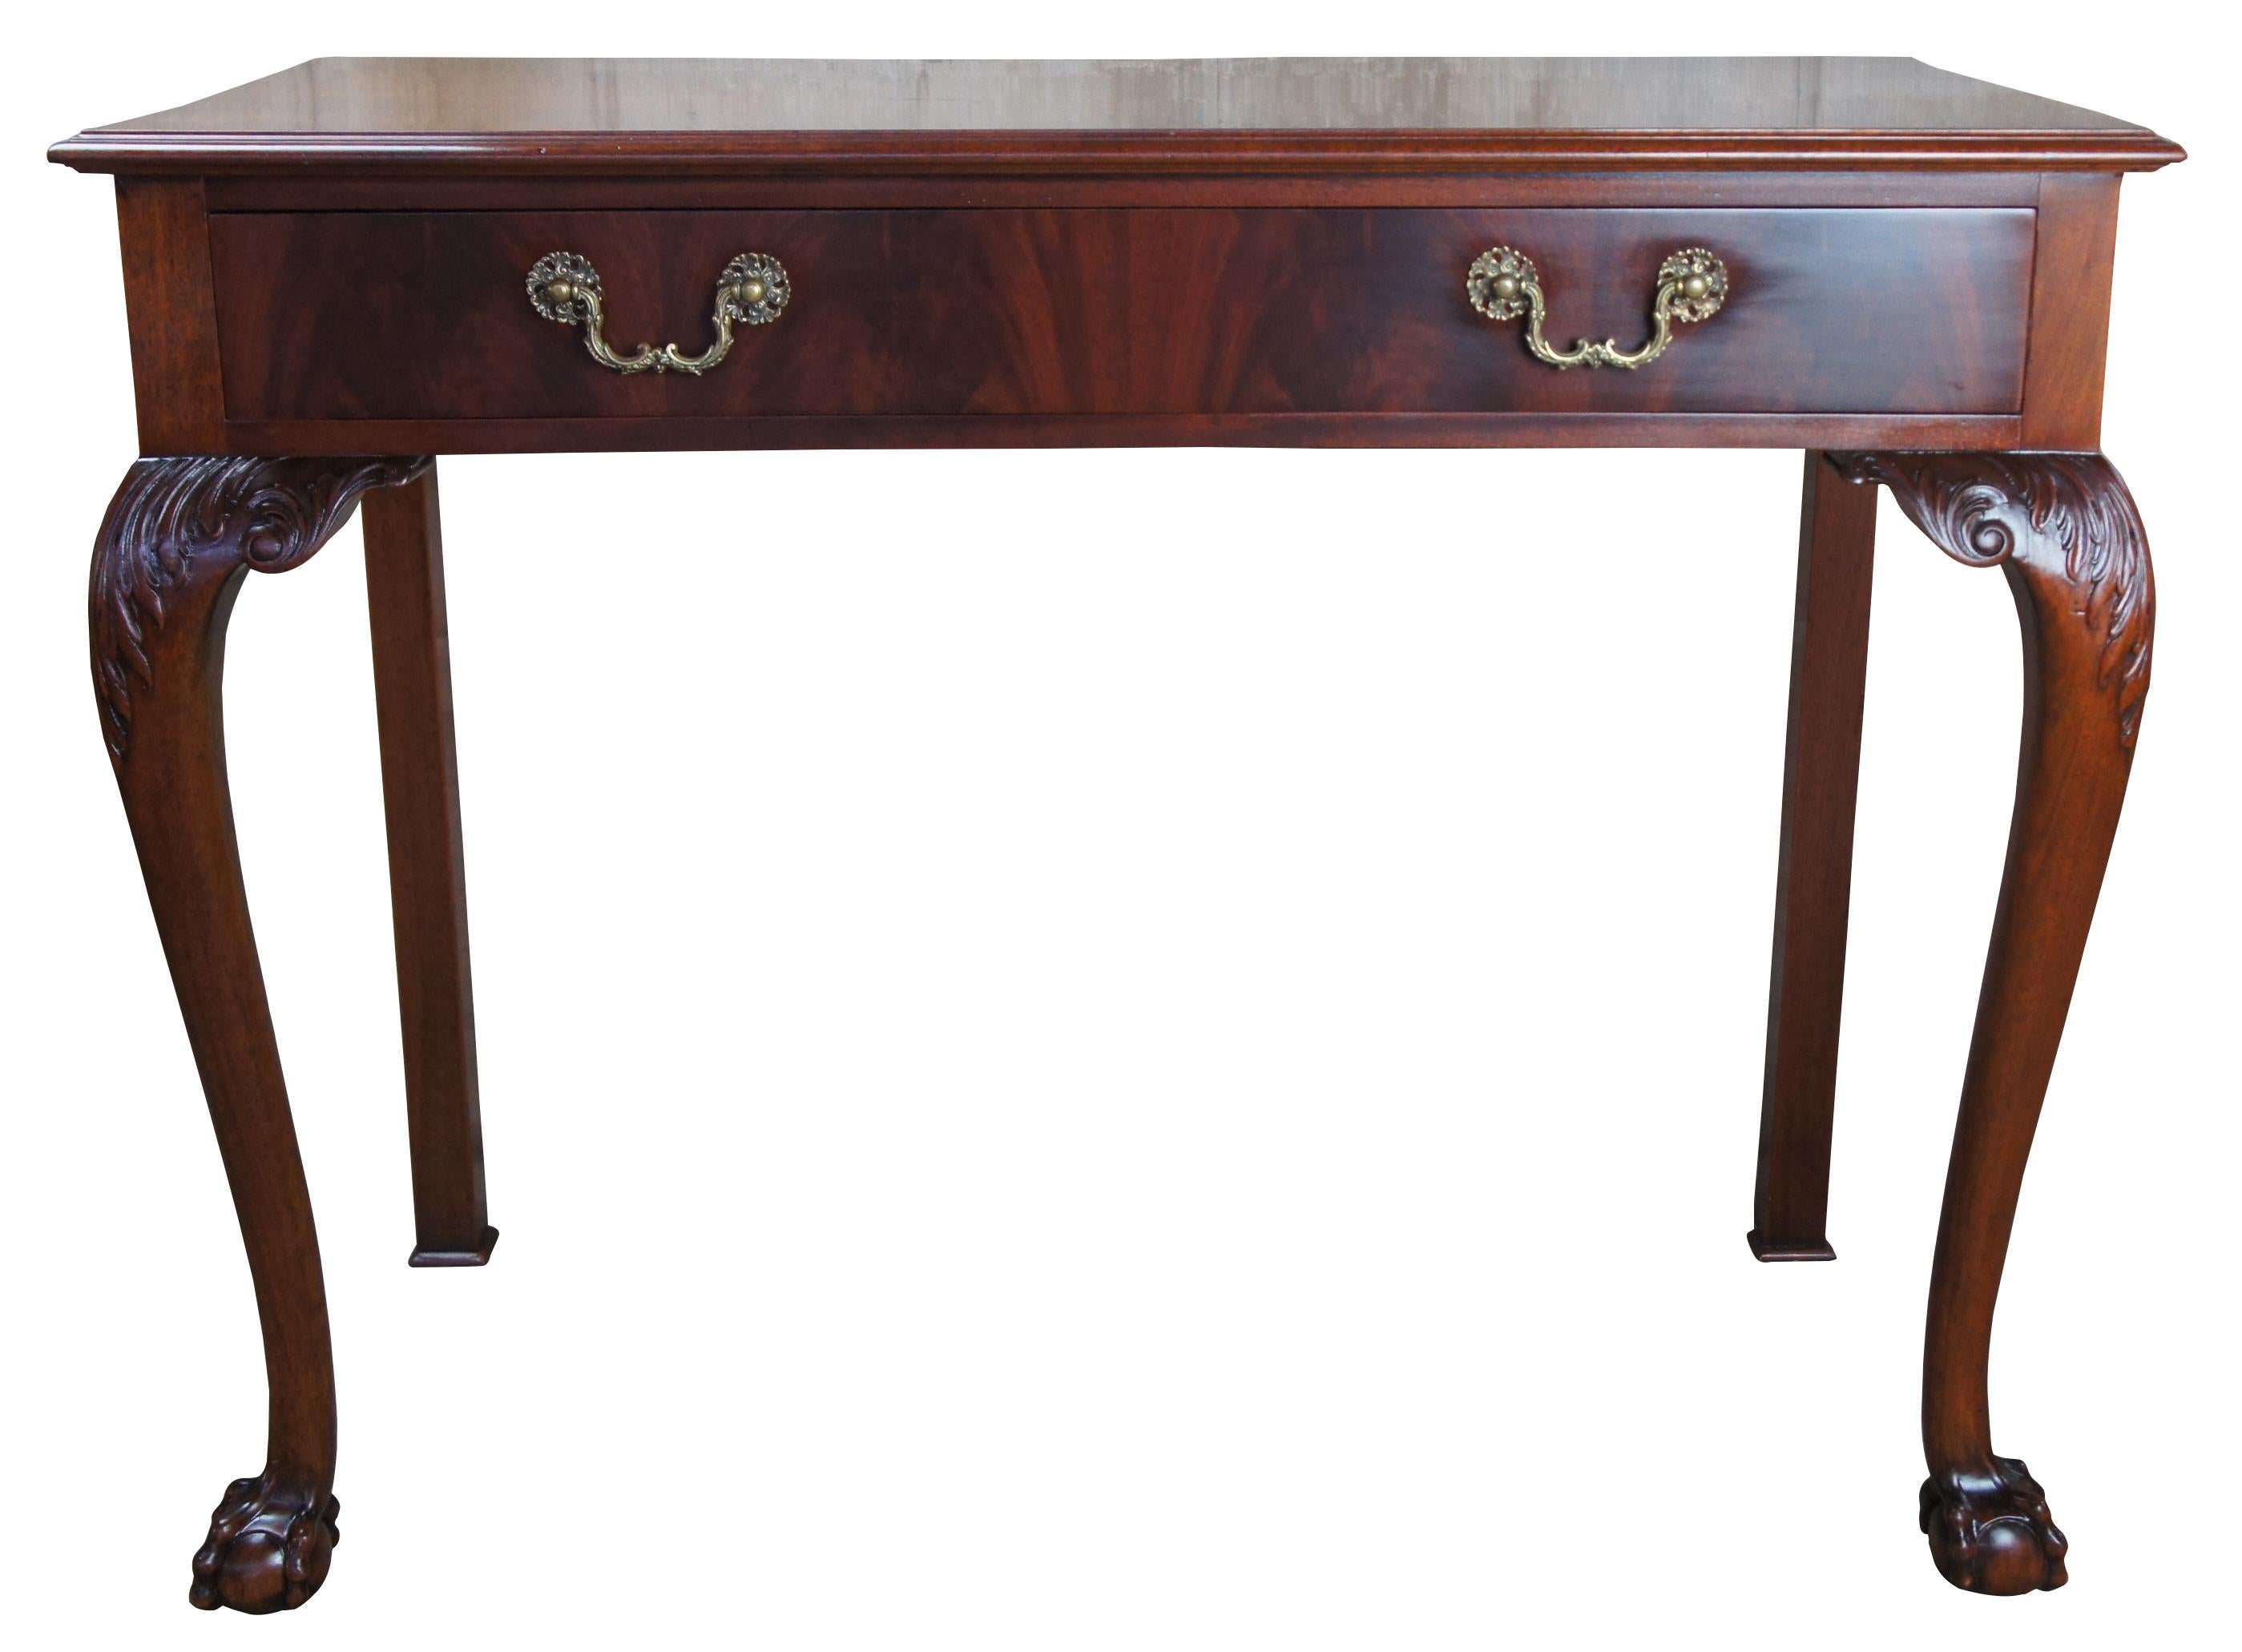 Antique Chippendale style flame mahogany carved buffet server ball claw feet

Quaint Chippendale style buffet. Features a flame mahogany central drawer with compartments for silverware, resting upon cabriole legs with intricate acanthus carvings